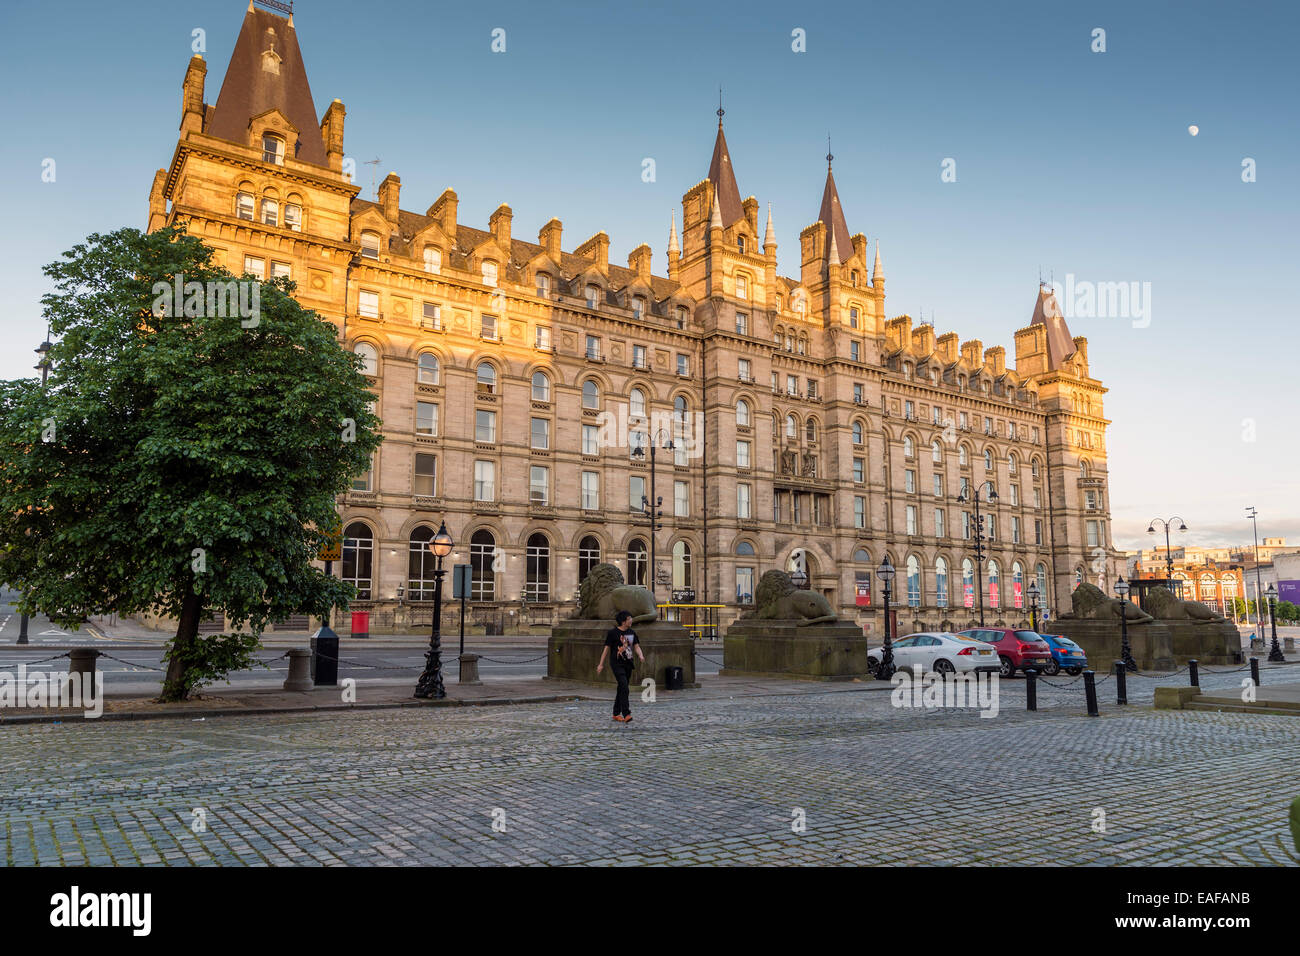 LIVERPOOL, UNITED KINGDOM - JUNE 8, 2014: The former North Western Hotel is on the east side of Lime Street, Liverpool, England. Stock Photo